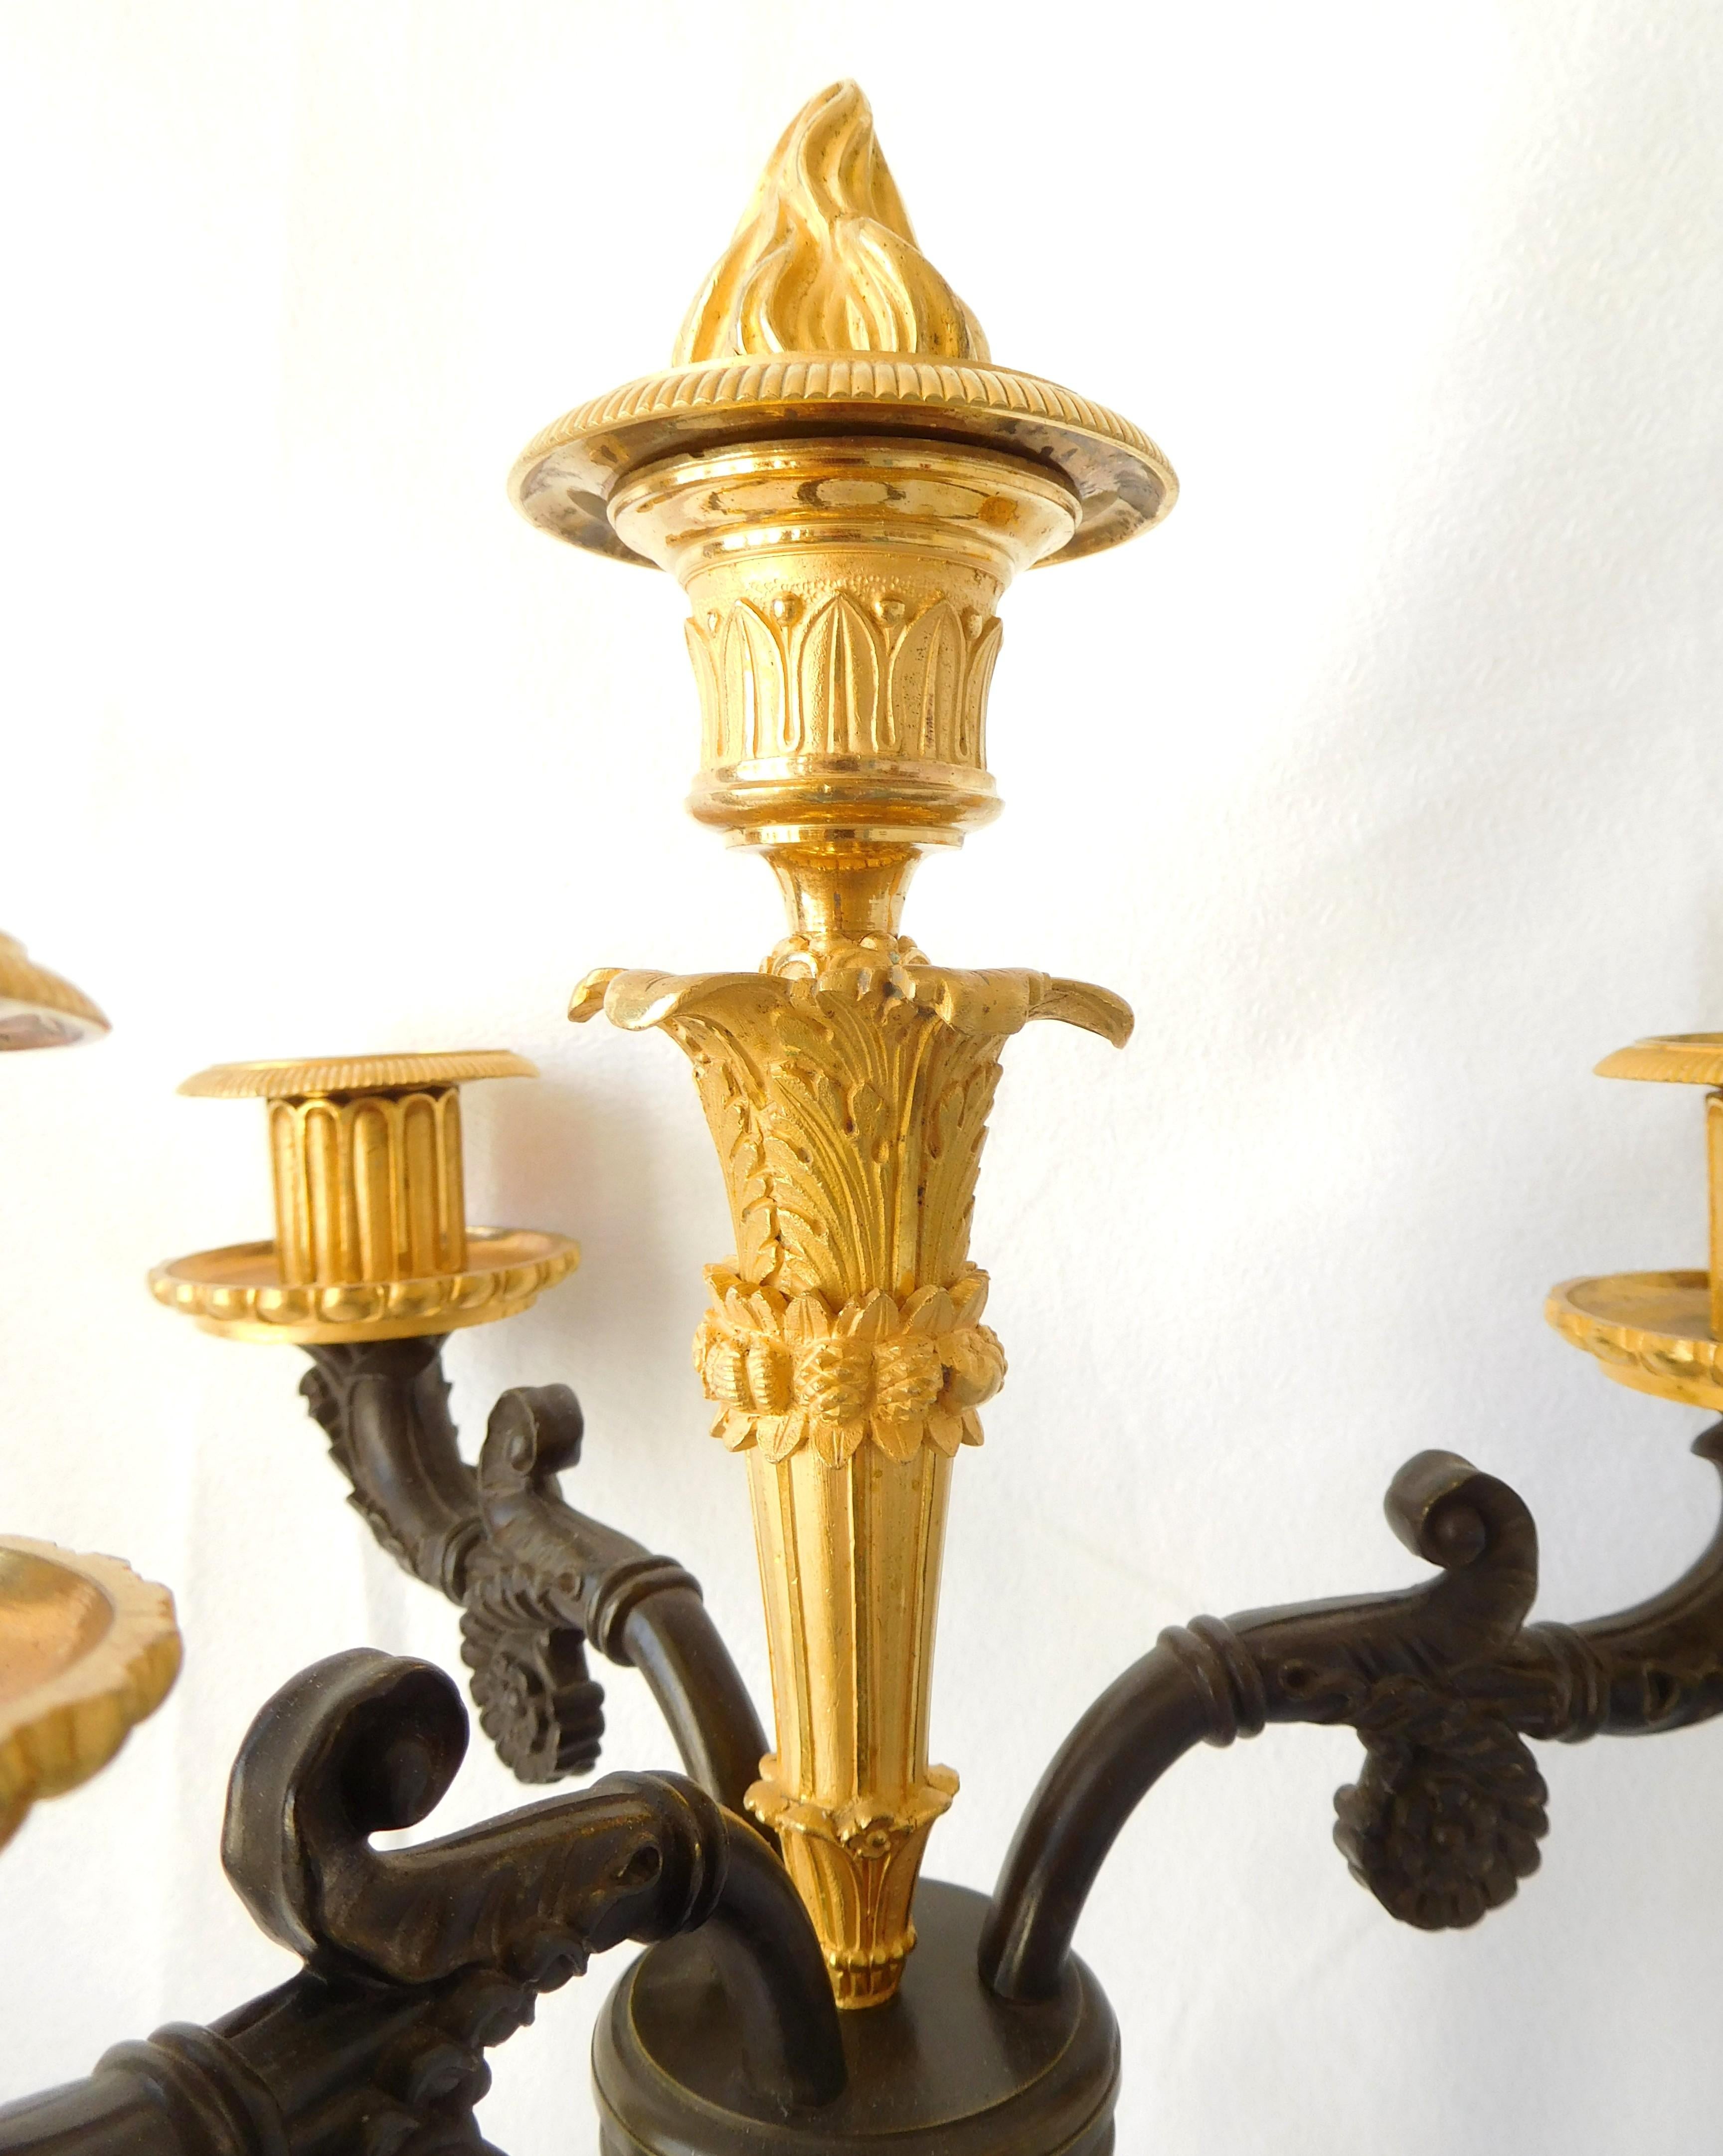 Pair of Tall Empire Ormolu & Bronze Candelabras Attributed to Gerard Jean Galle For Sale 11